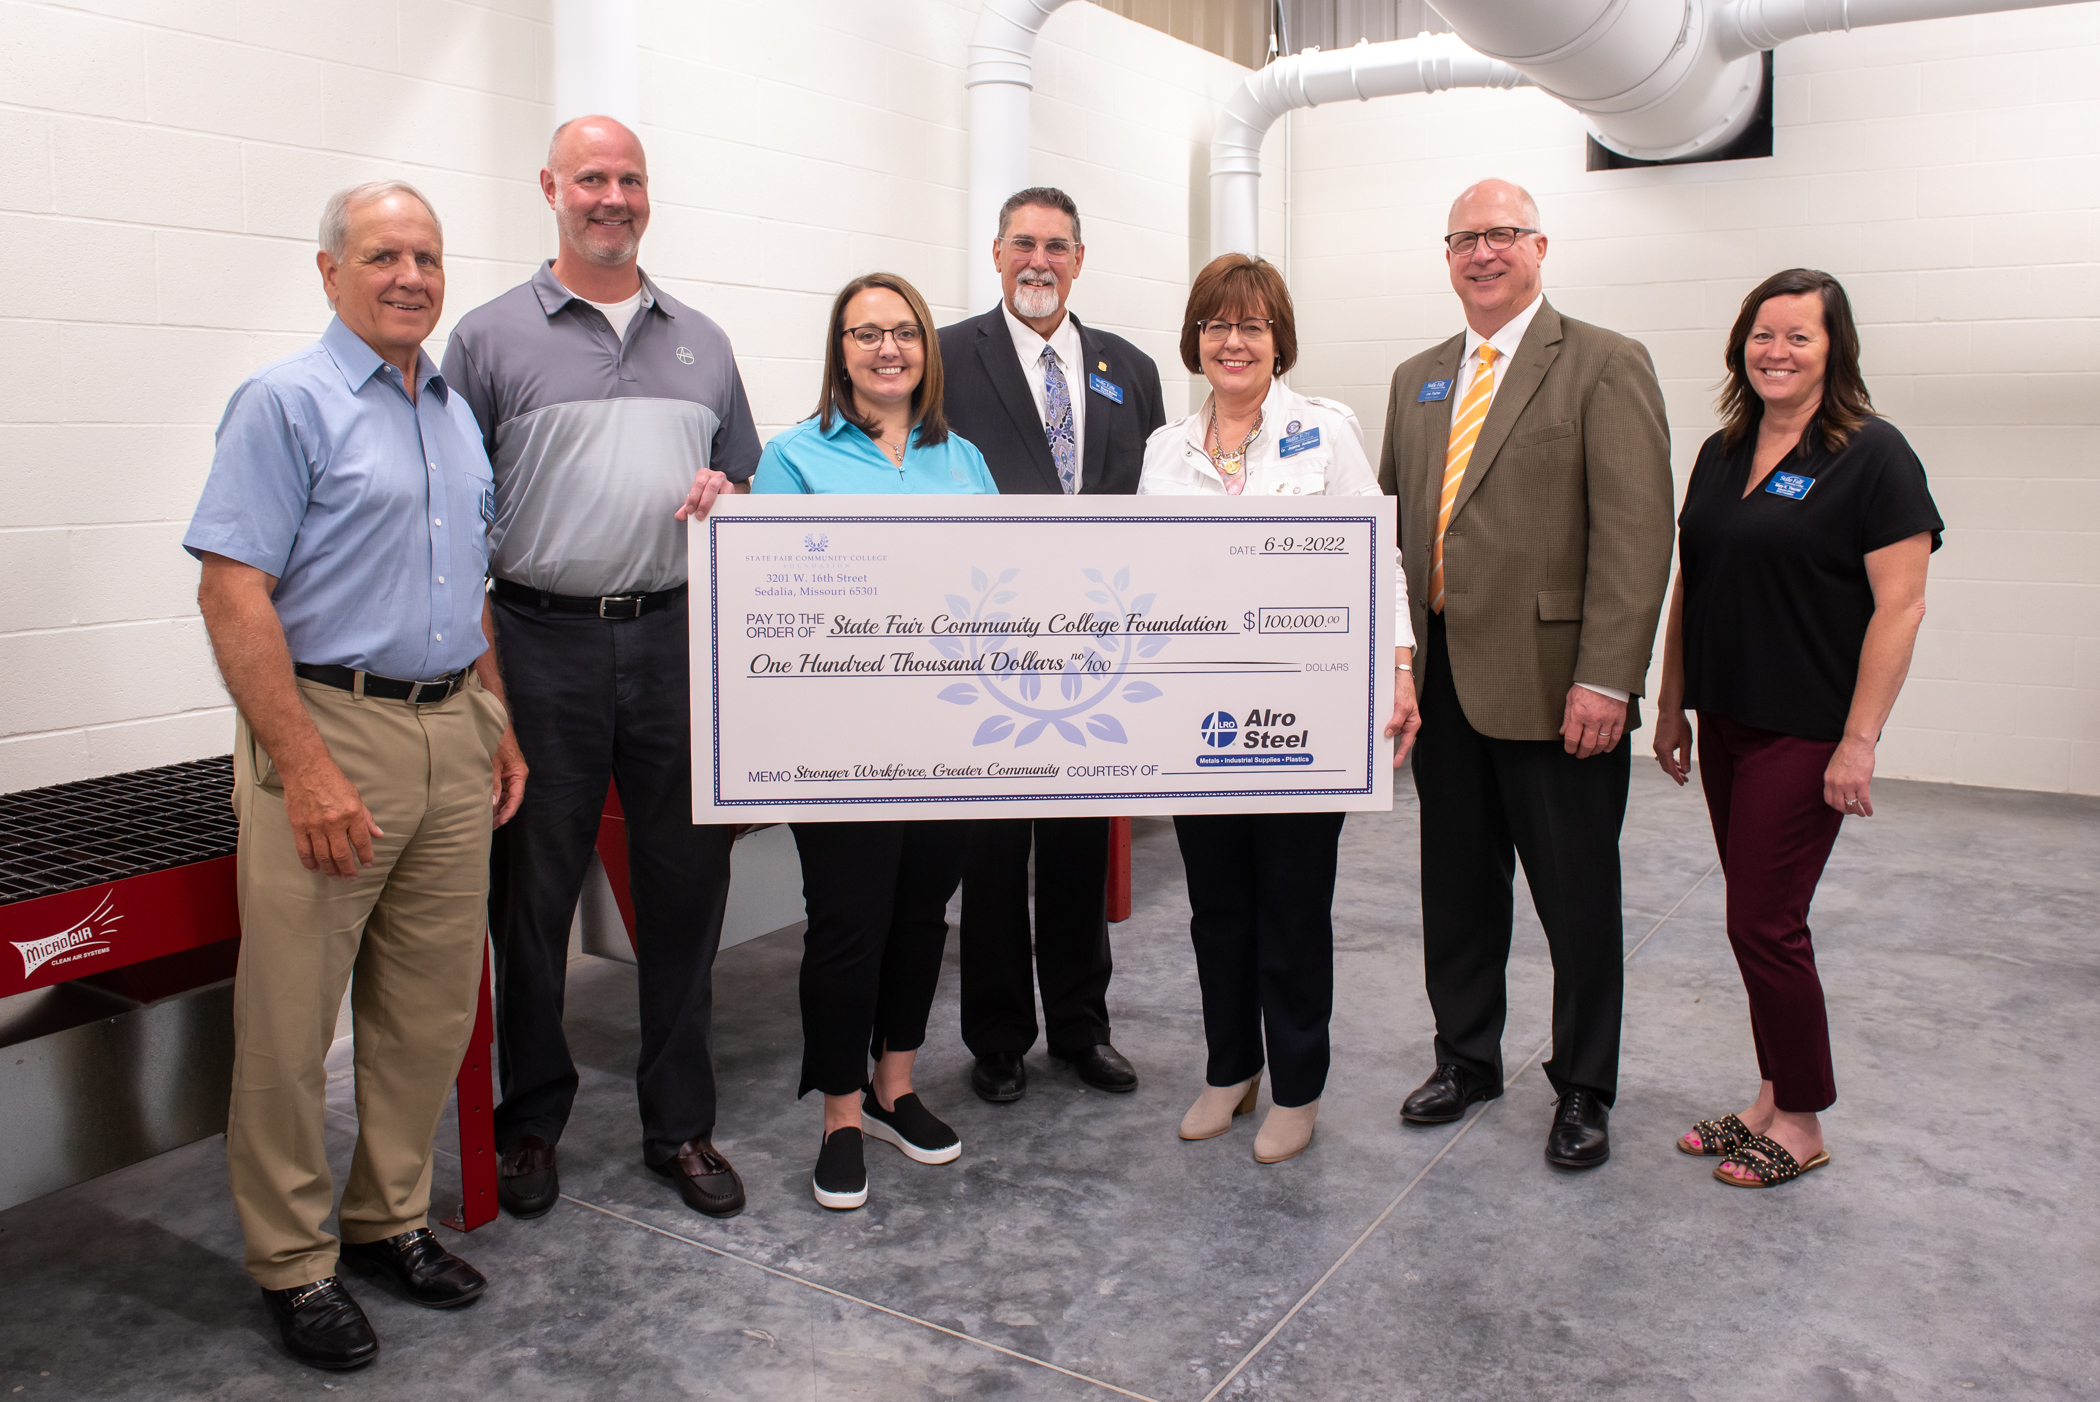 Read more about Alro Steel donates $100,000 to SFCC’s capital campaign